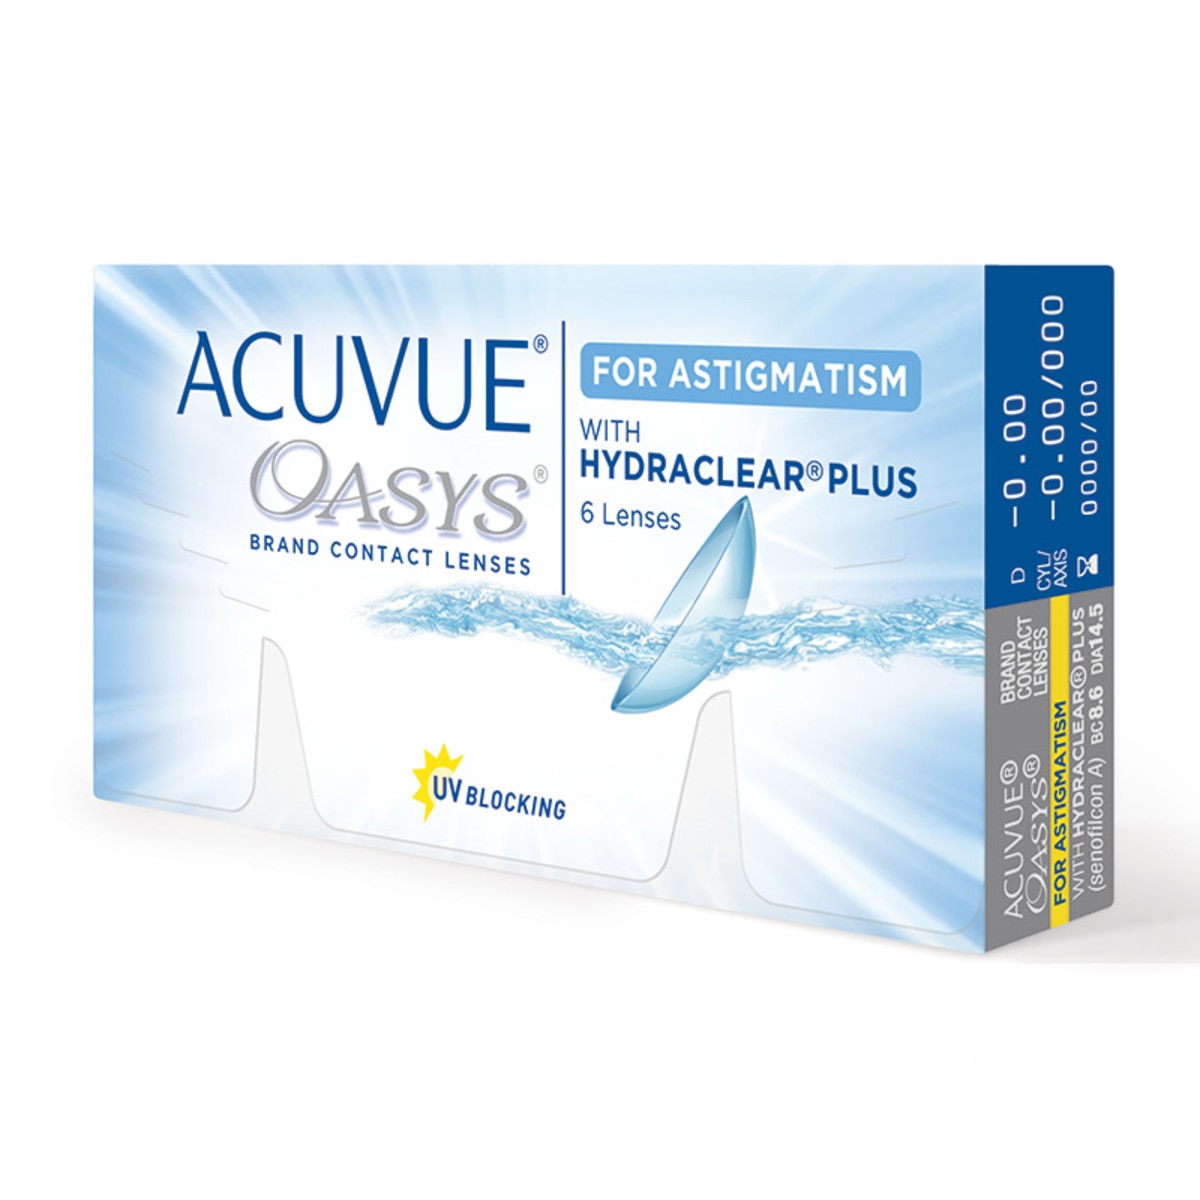 ACUVUE OASYS® con HYDRACLEAR Plus® para Astigmatismo (D -4.25, Cyl/Axis -1.75/170)